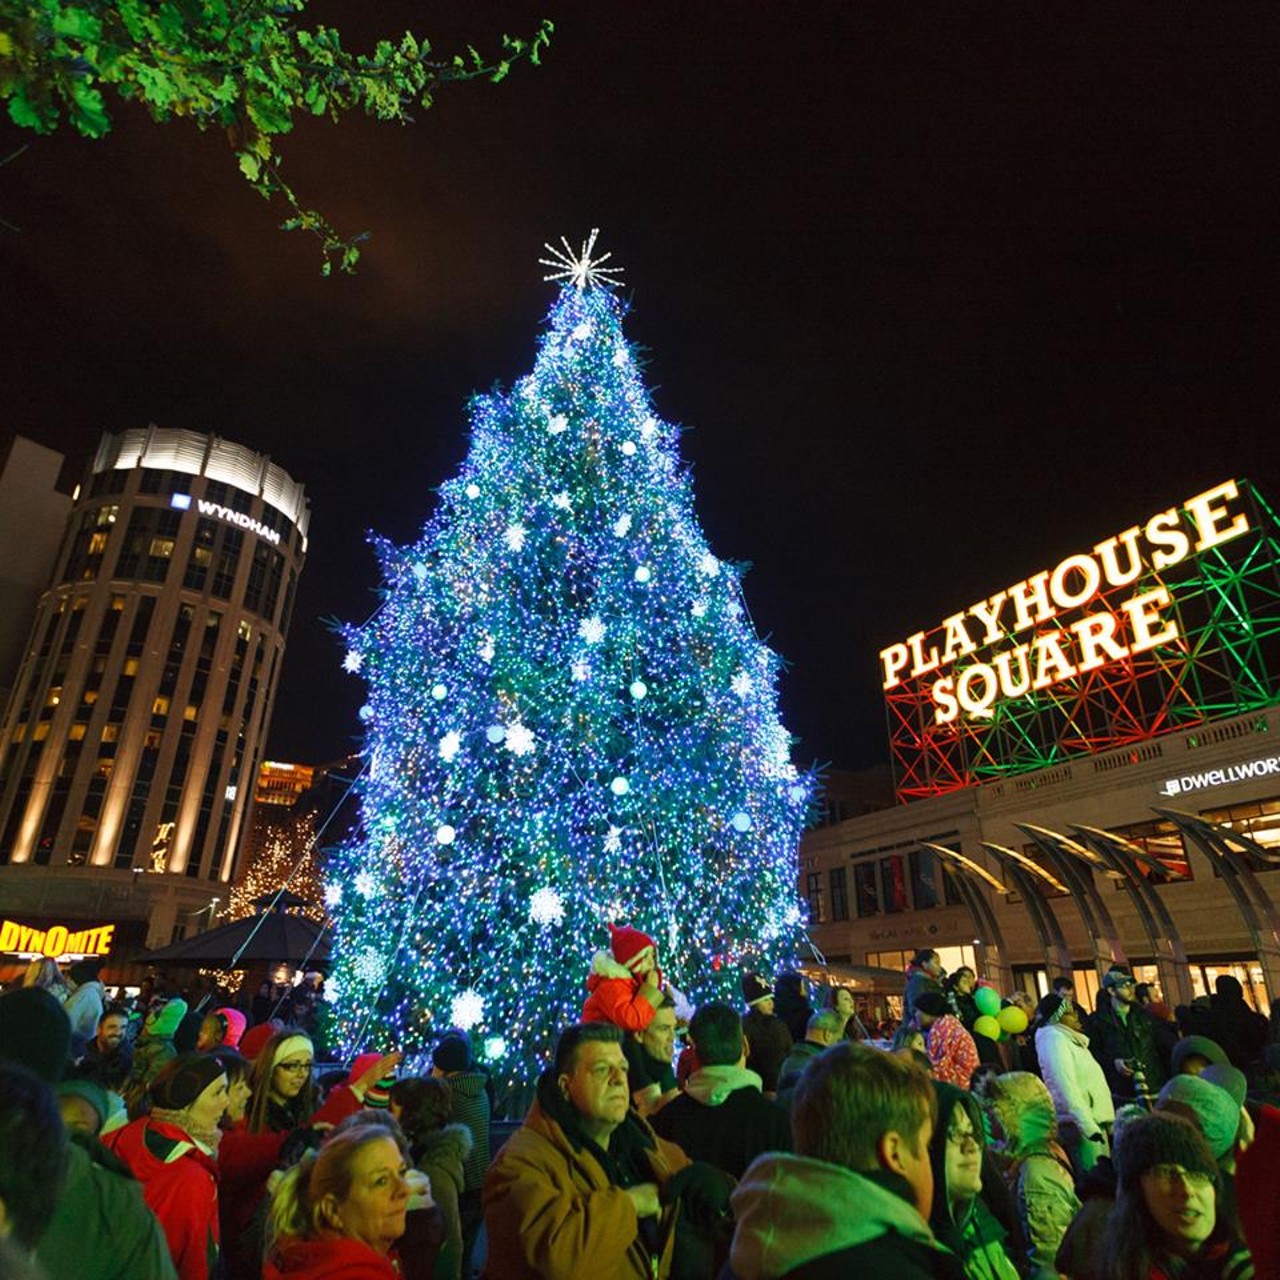 The full Christmas line-up at Playhouse Square is a must-see. This year the district is showing A Christmas Carol, A Christmas Story and more. Check out playhousesquare.org for their full line up and show times. (Photo courtesy Cleveland Play House)